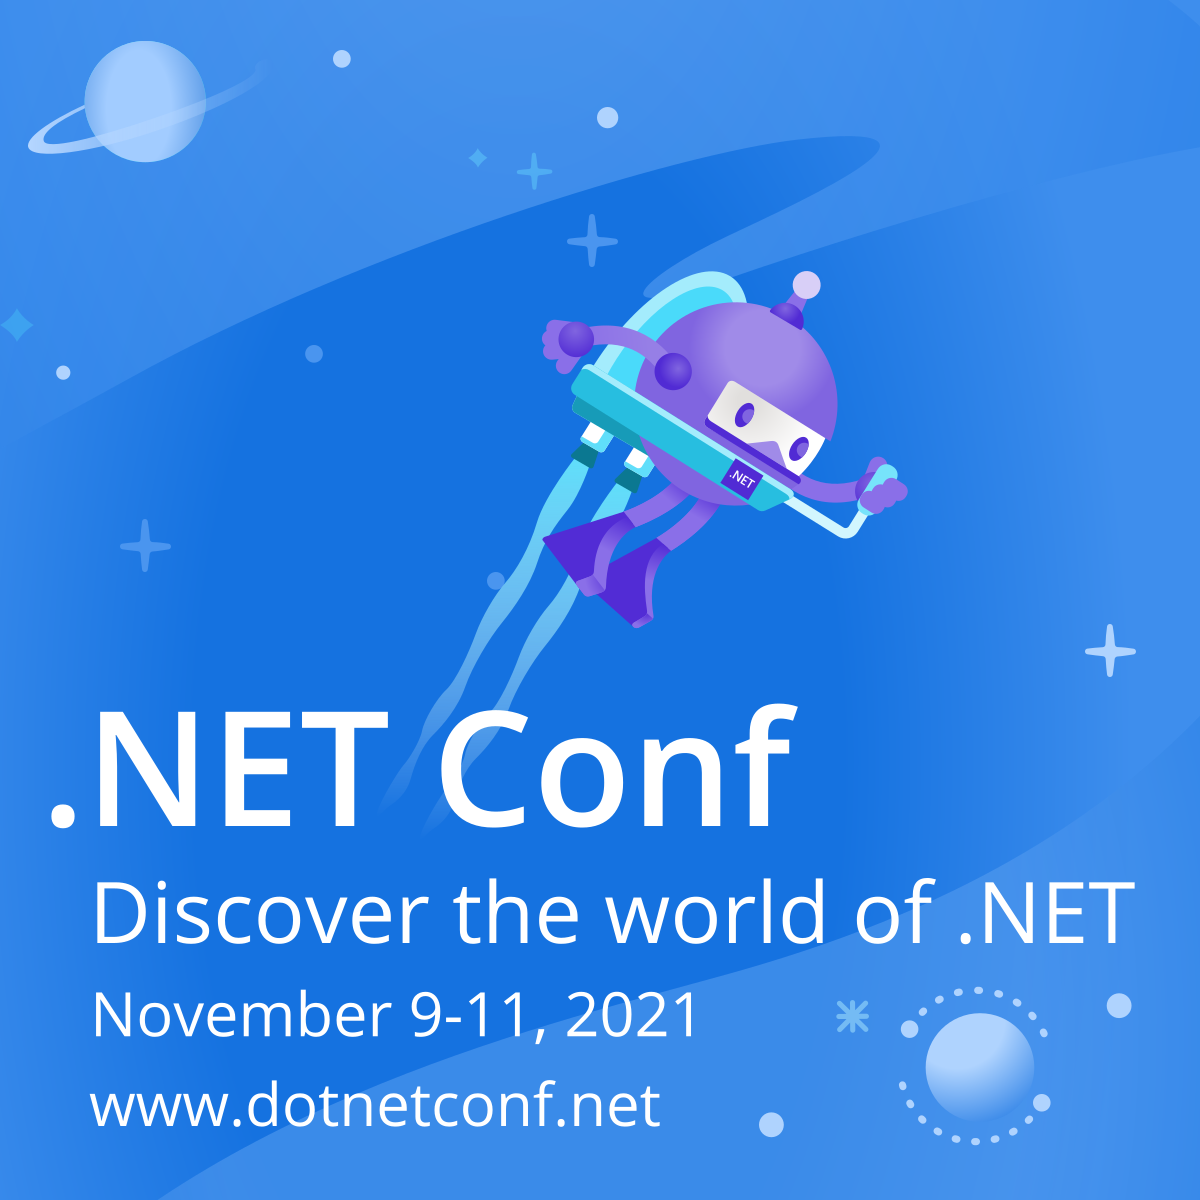 .NET 6 Launches at .NET Conf, November 9-11